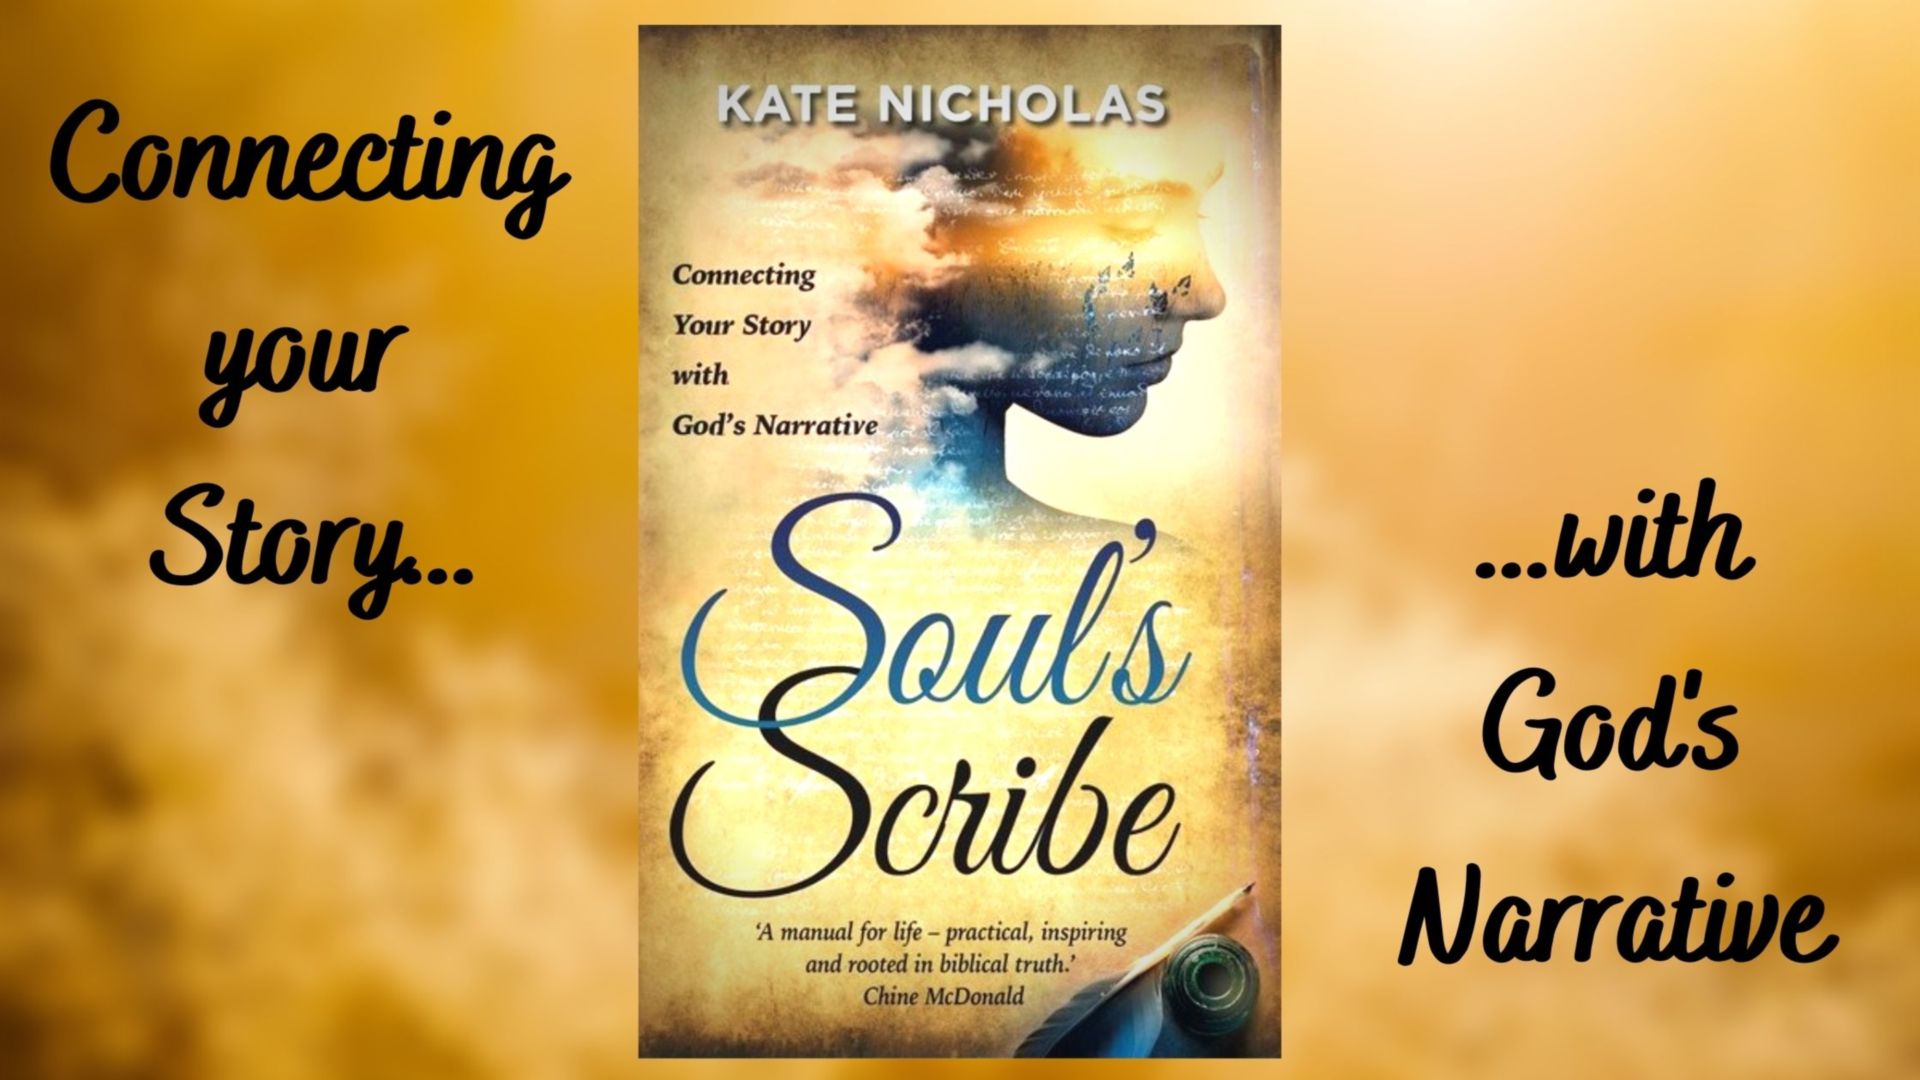 An interview with Kate Nicholas the author of the book Soul's Scribe